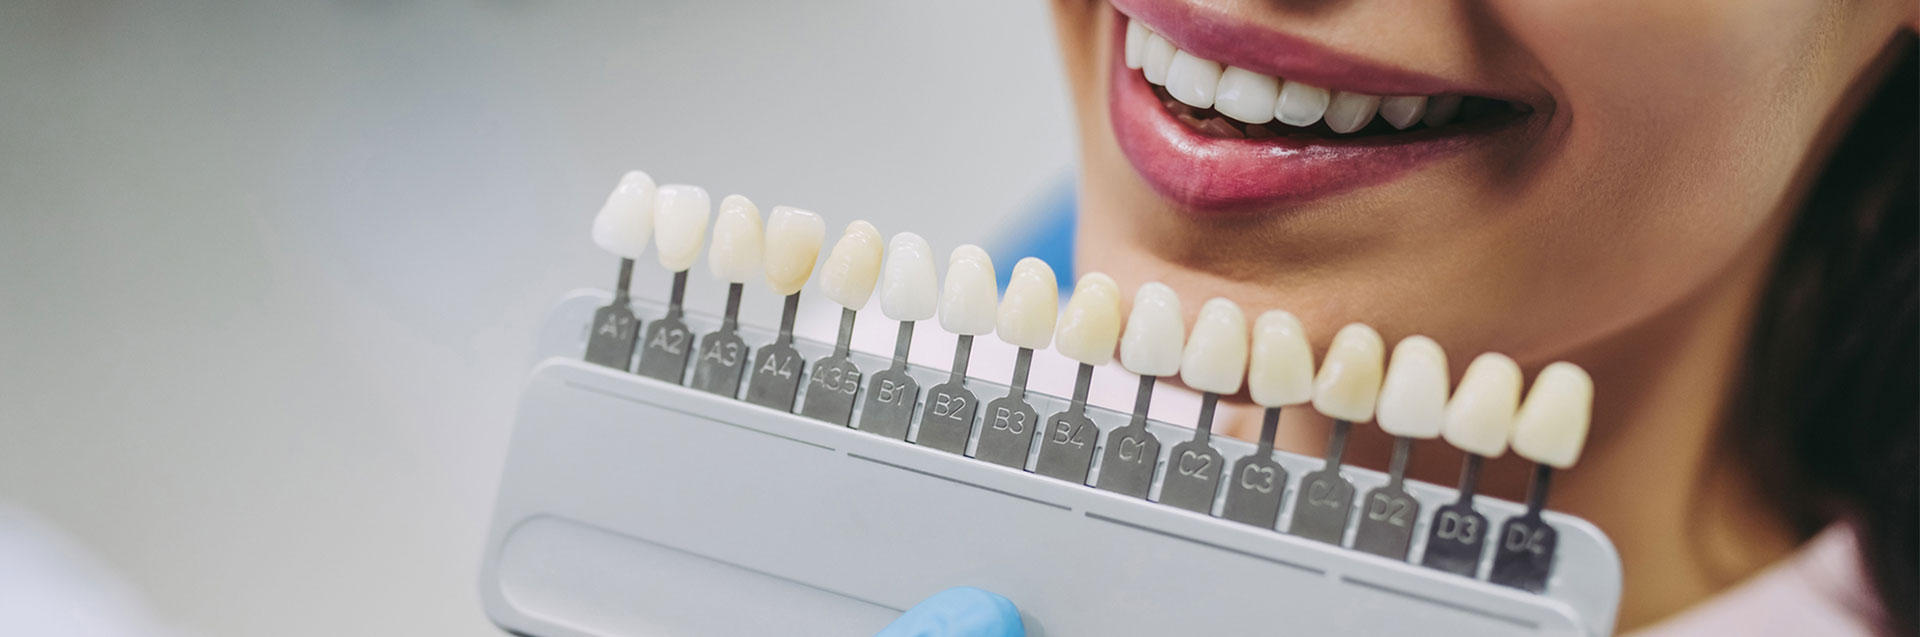 Close up portrait of young woman in dentist chair choosing tooth implants